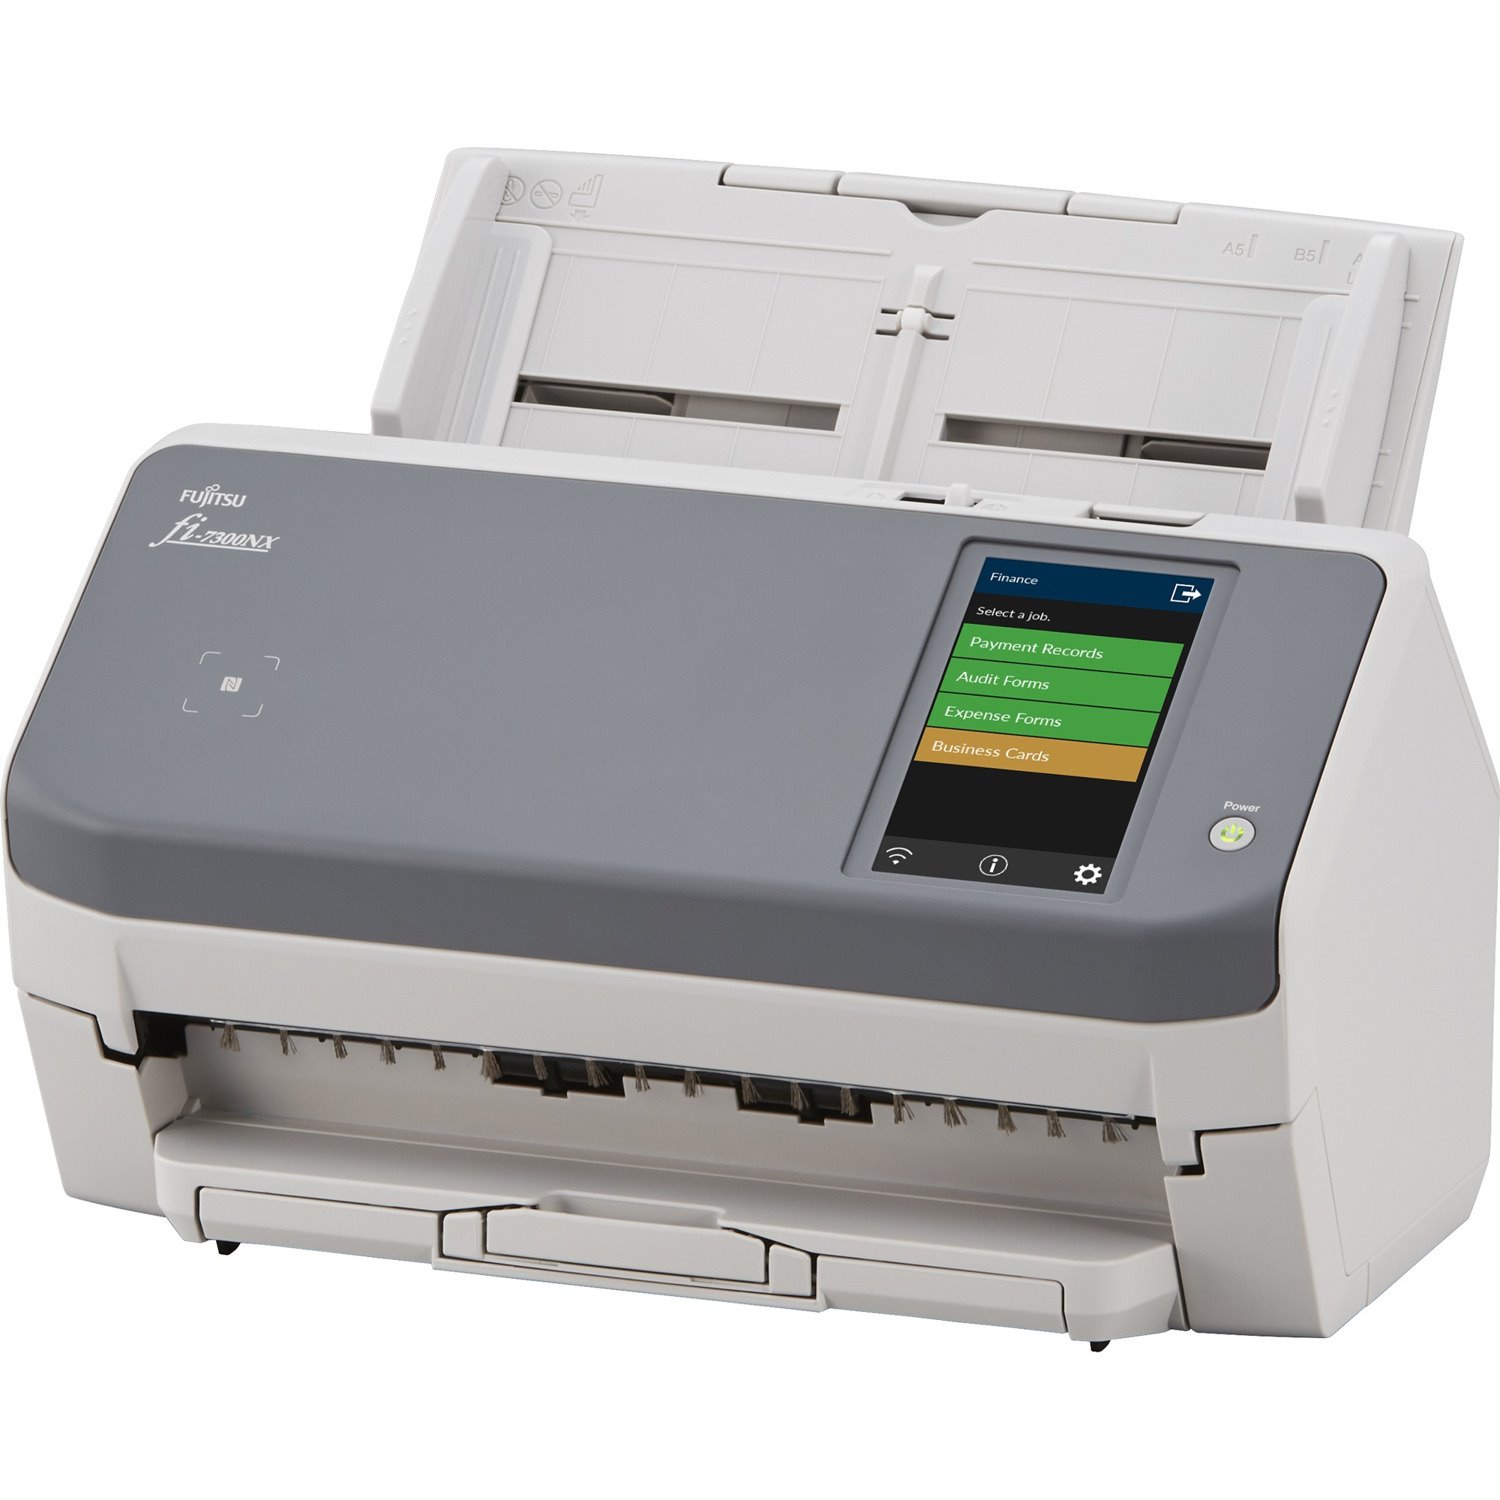 Ricoh fi-7300NX Sheetfed Scanner